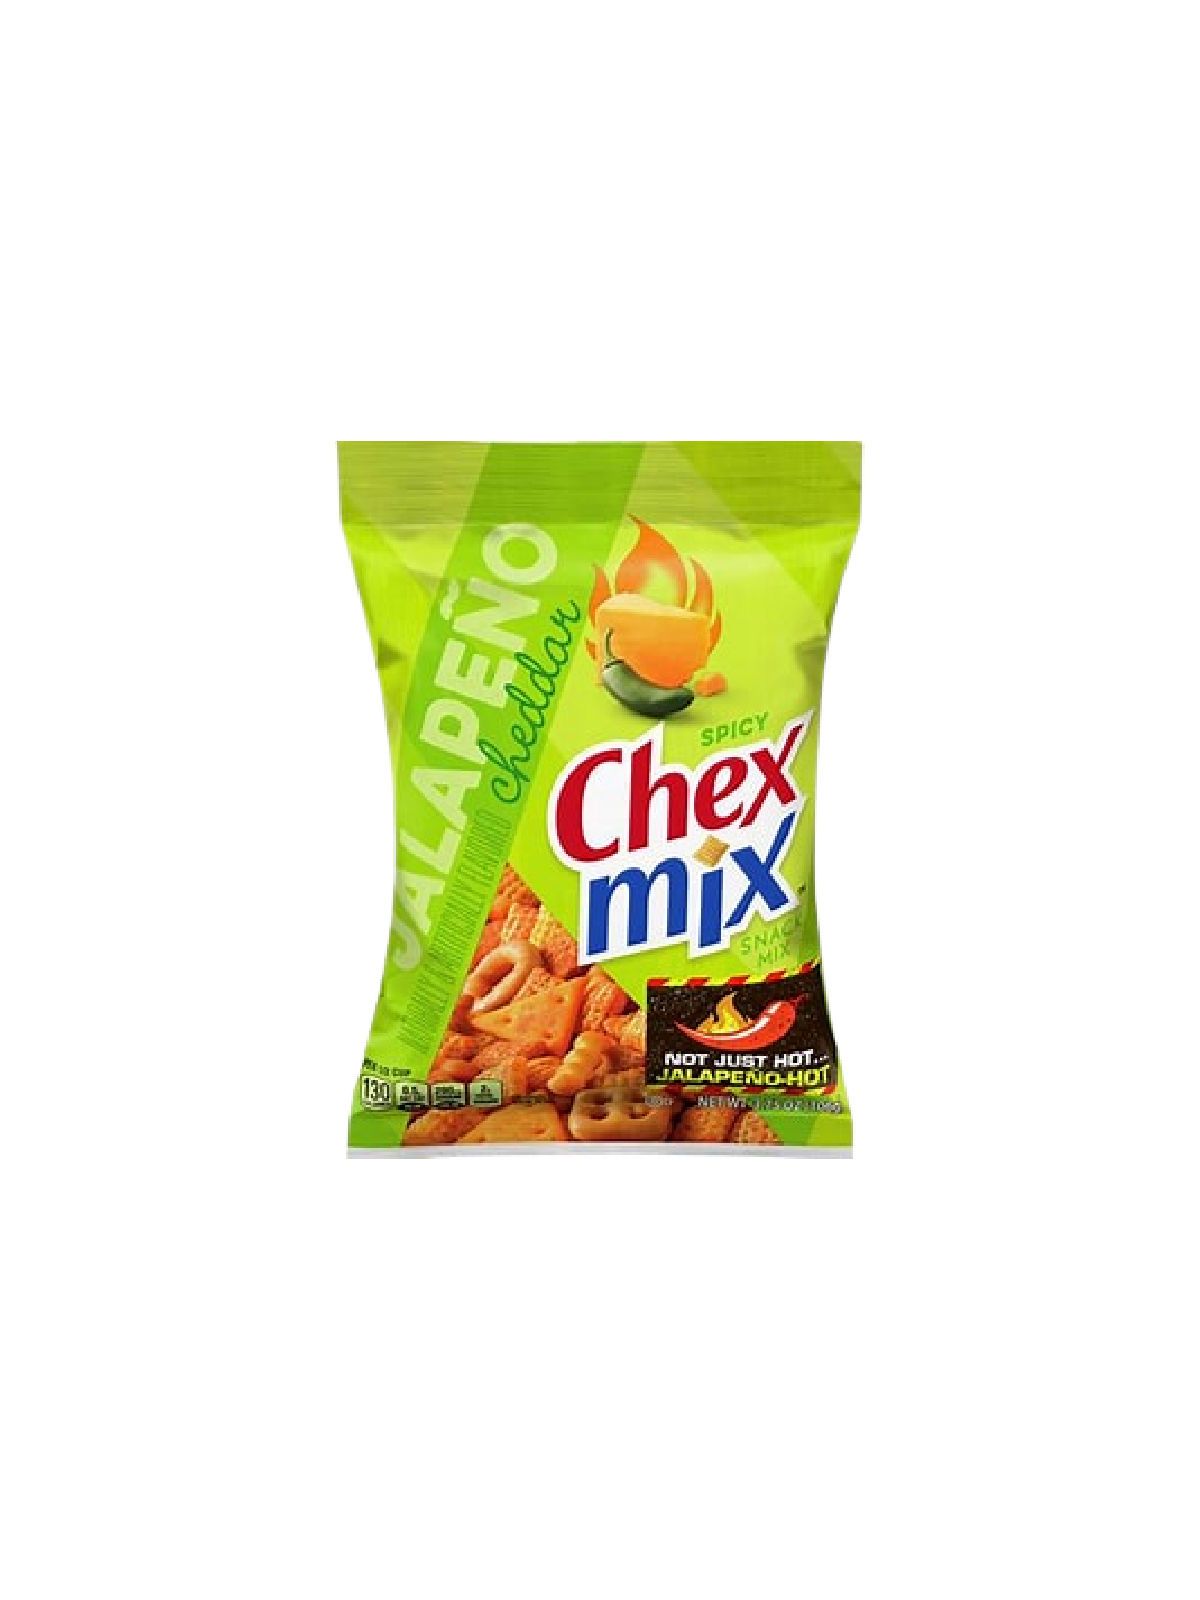 CHEX MIX SPICY JALAPENO CHEDDAR 8 CT